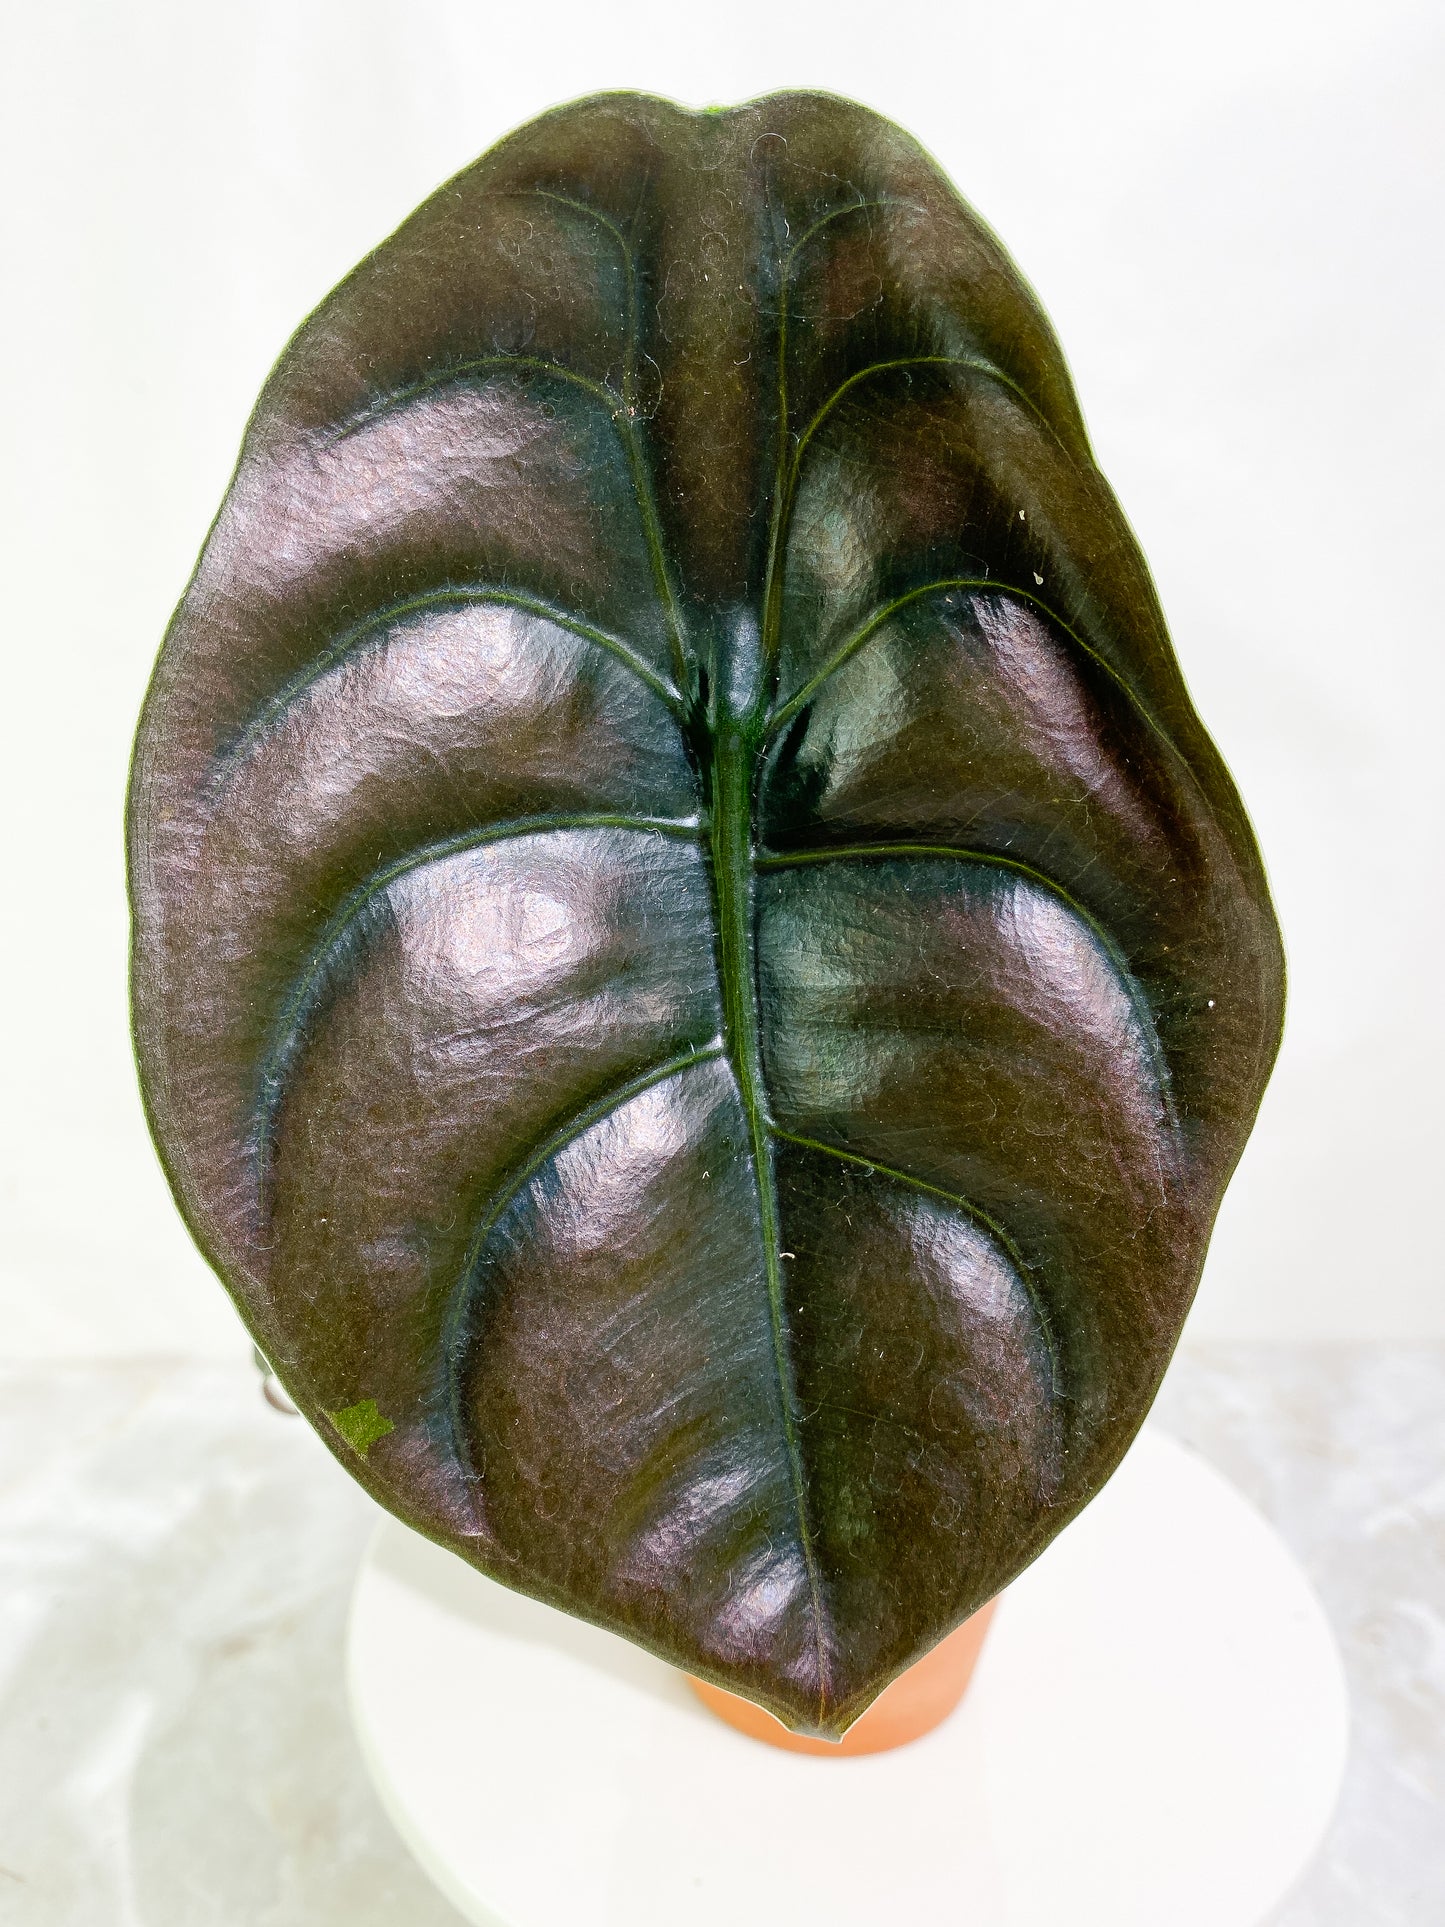 Alocasia cuprea 4 leaves rooted